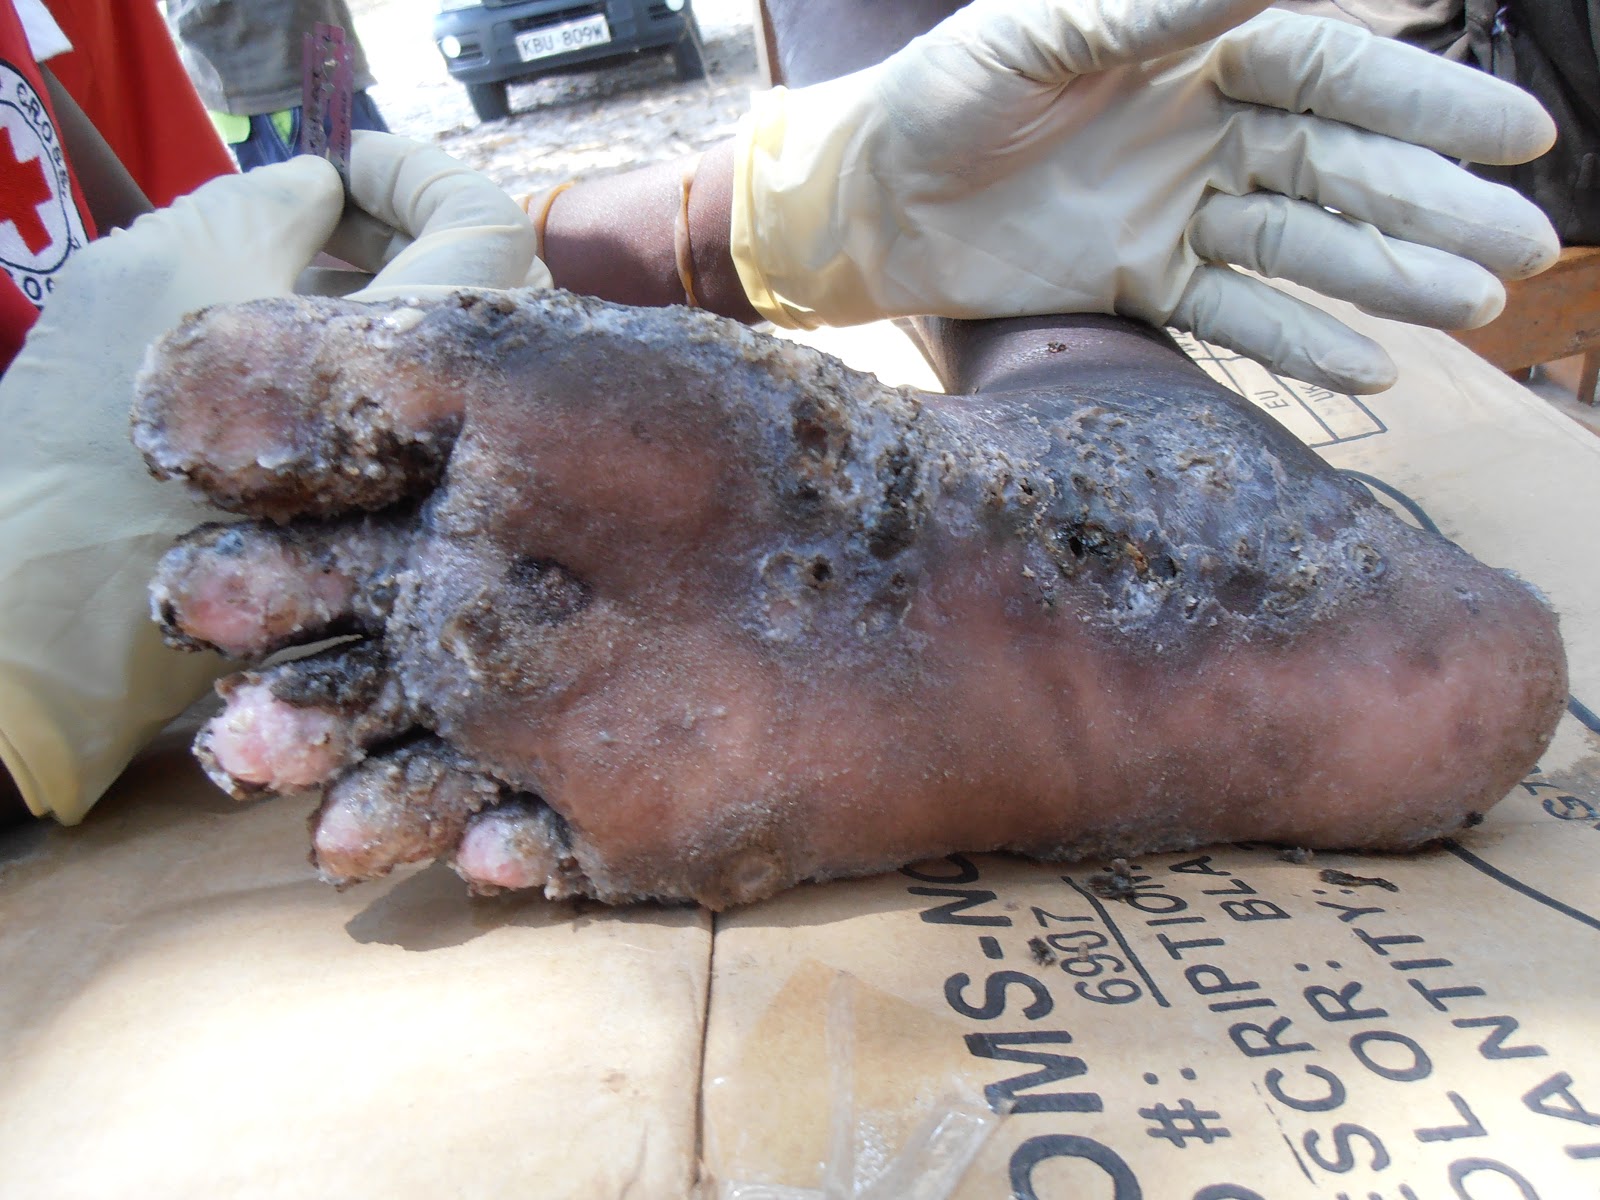 A badly infected foot from sand fleas.